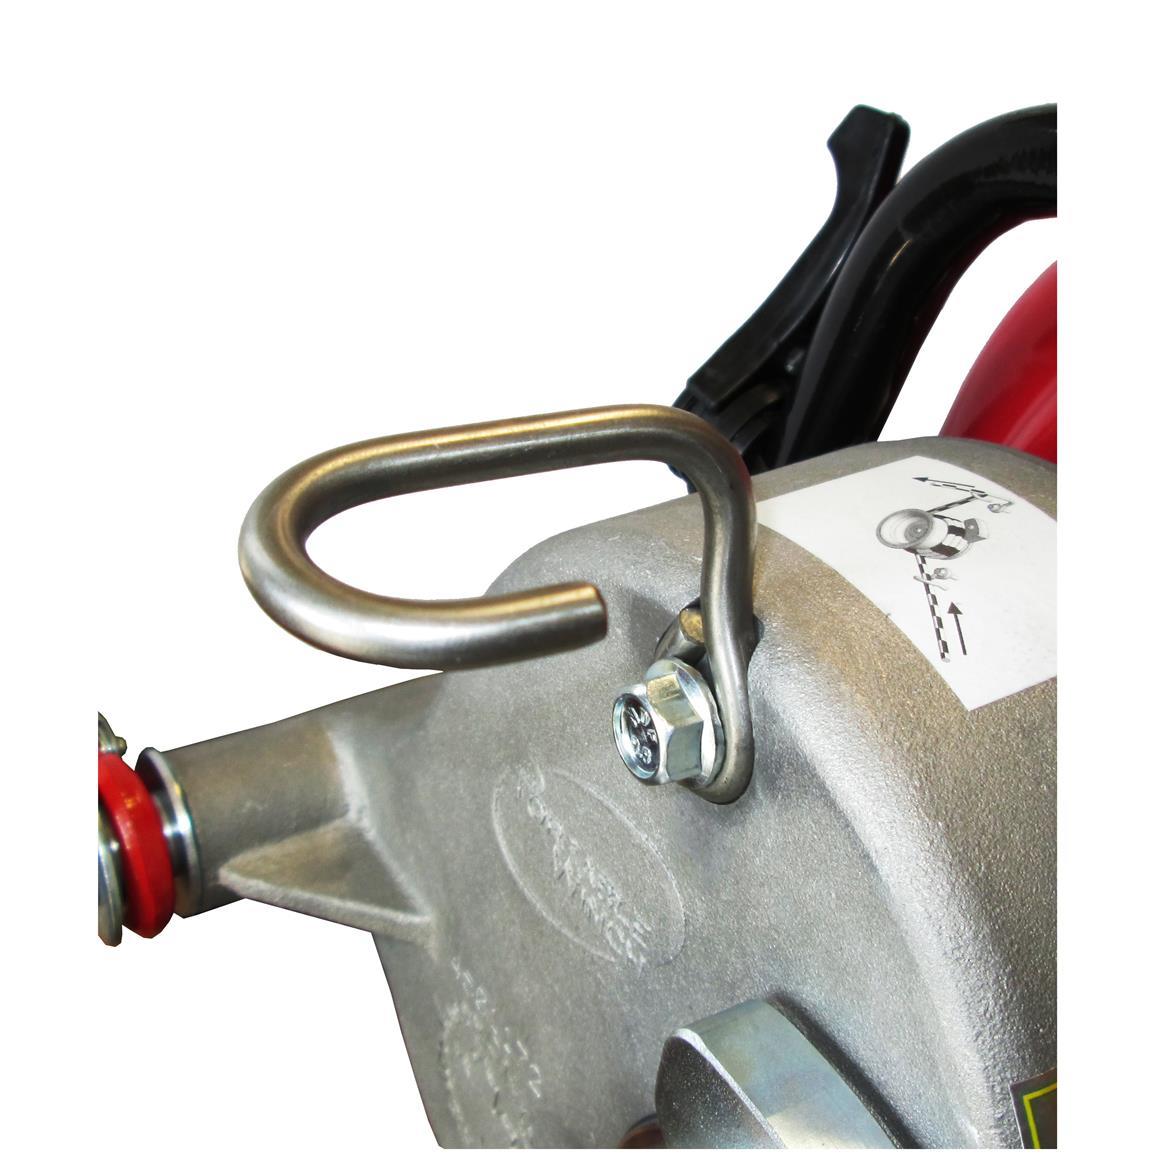 Portable Winch 10-0131 Steel Rope Guide